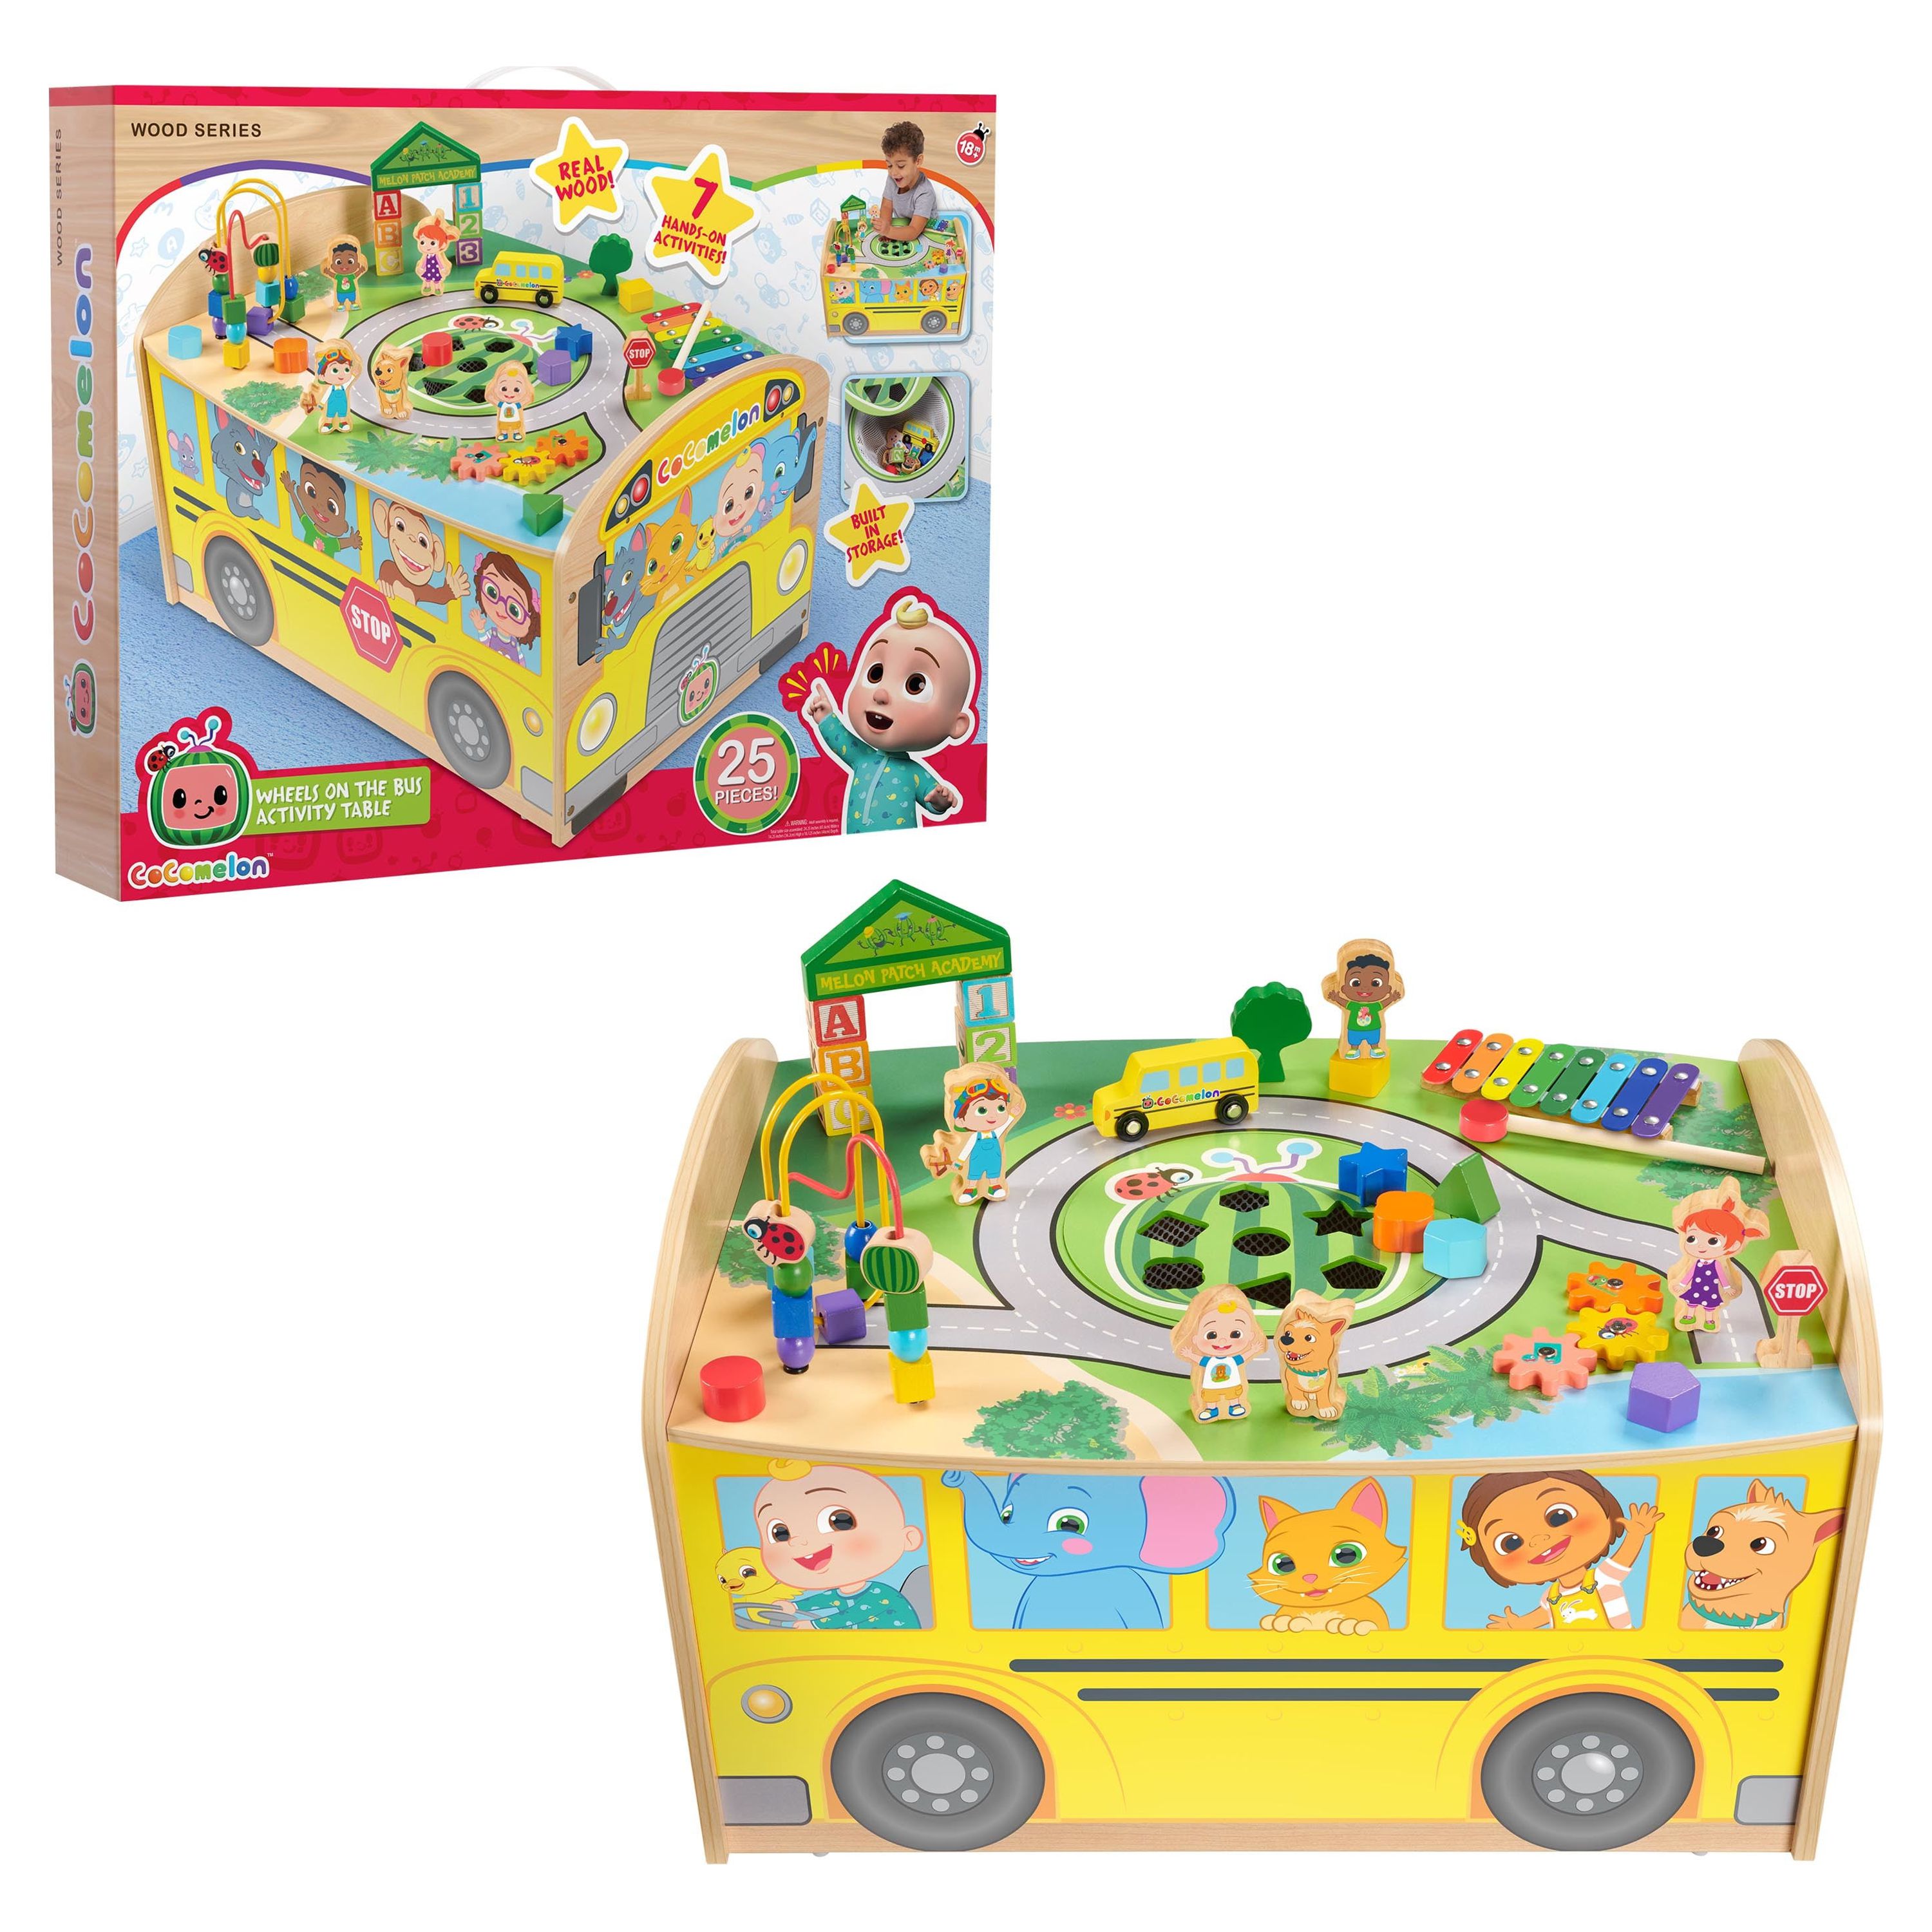 Cocomelon Wheels on the Bus Wooden Activity Table, Recycled Wood, for Toddlers 18 Months+ - image 4 of 7